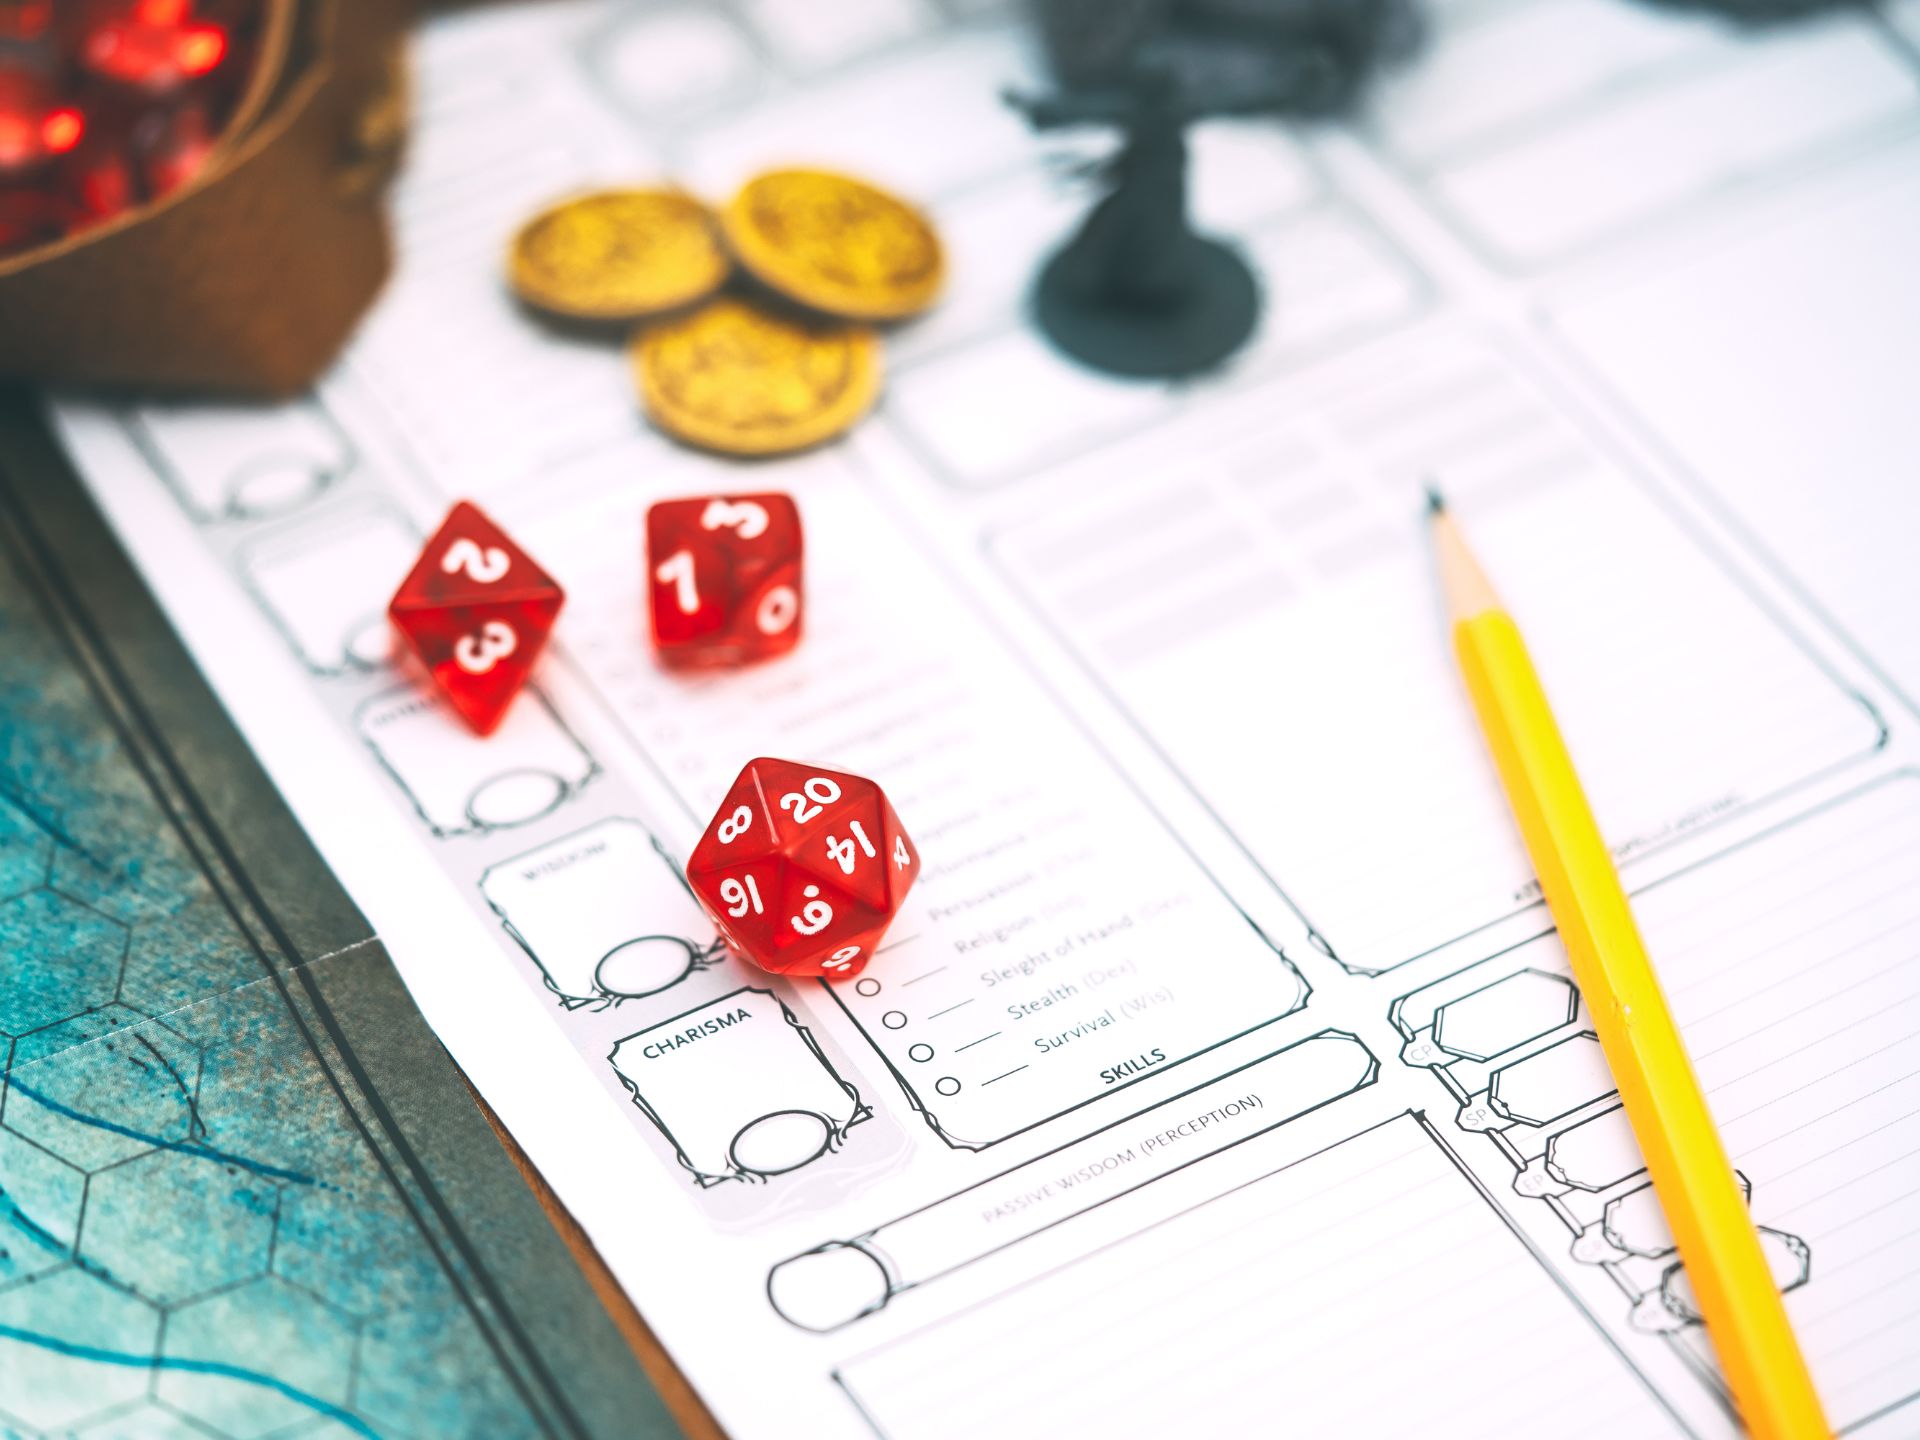 Three dice and a pencil lay on a D&D character sheet